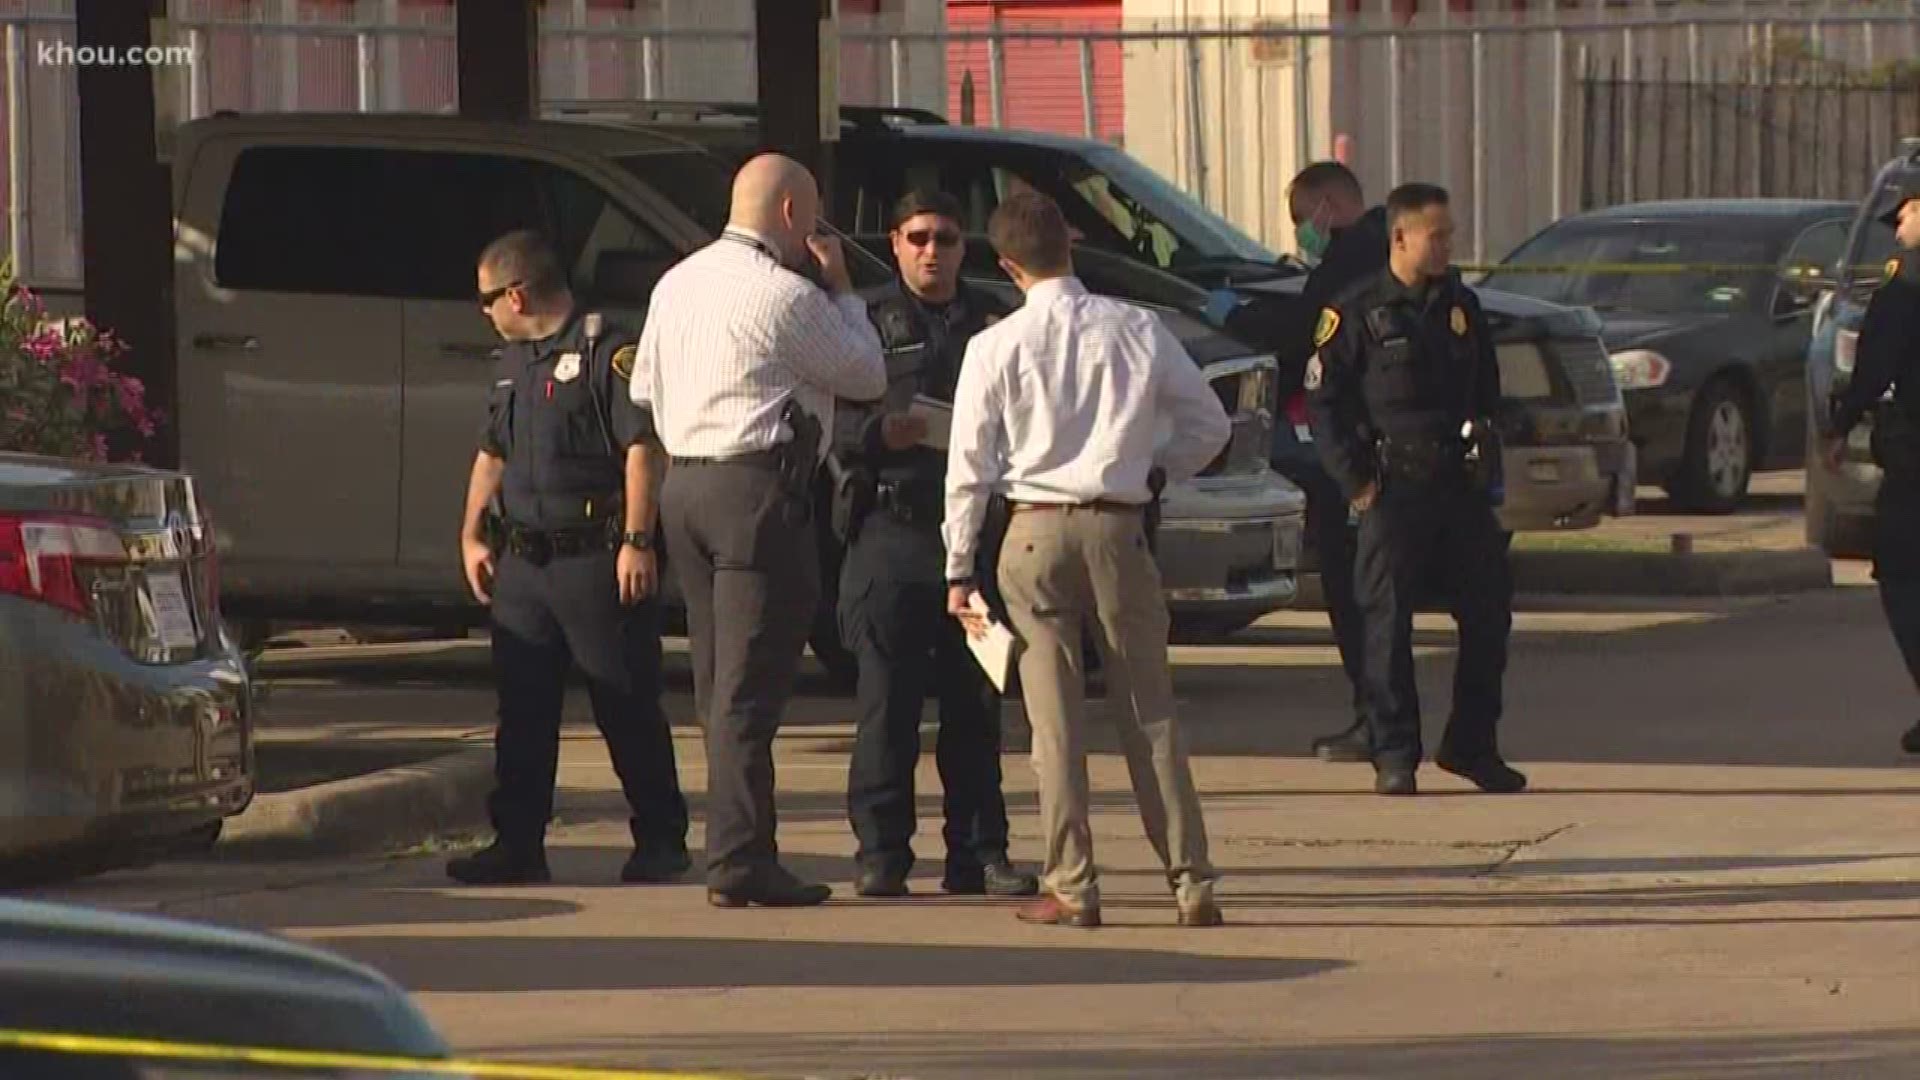 Houston Police are investigating after a man was fatally shot Saturday afternoon at an apartment complex in West Houston.